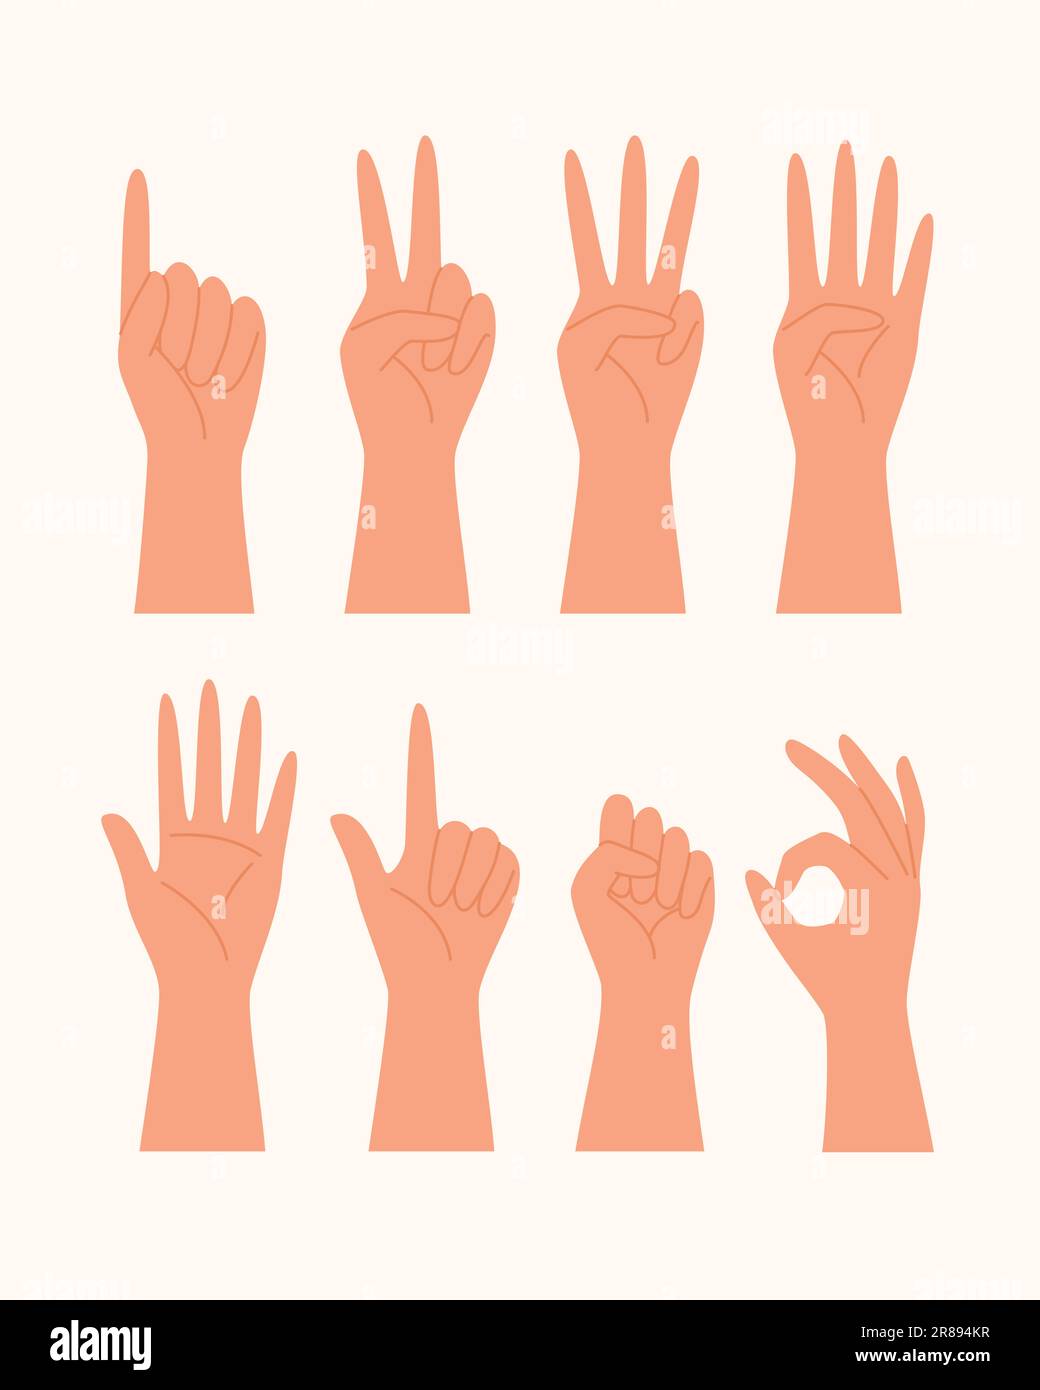 Set of Hands Showing Different Gestures for Counting for Sign Language Concept Illustration Stock Vector